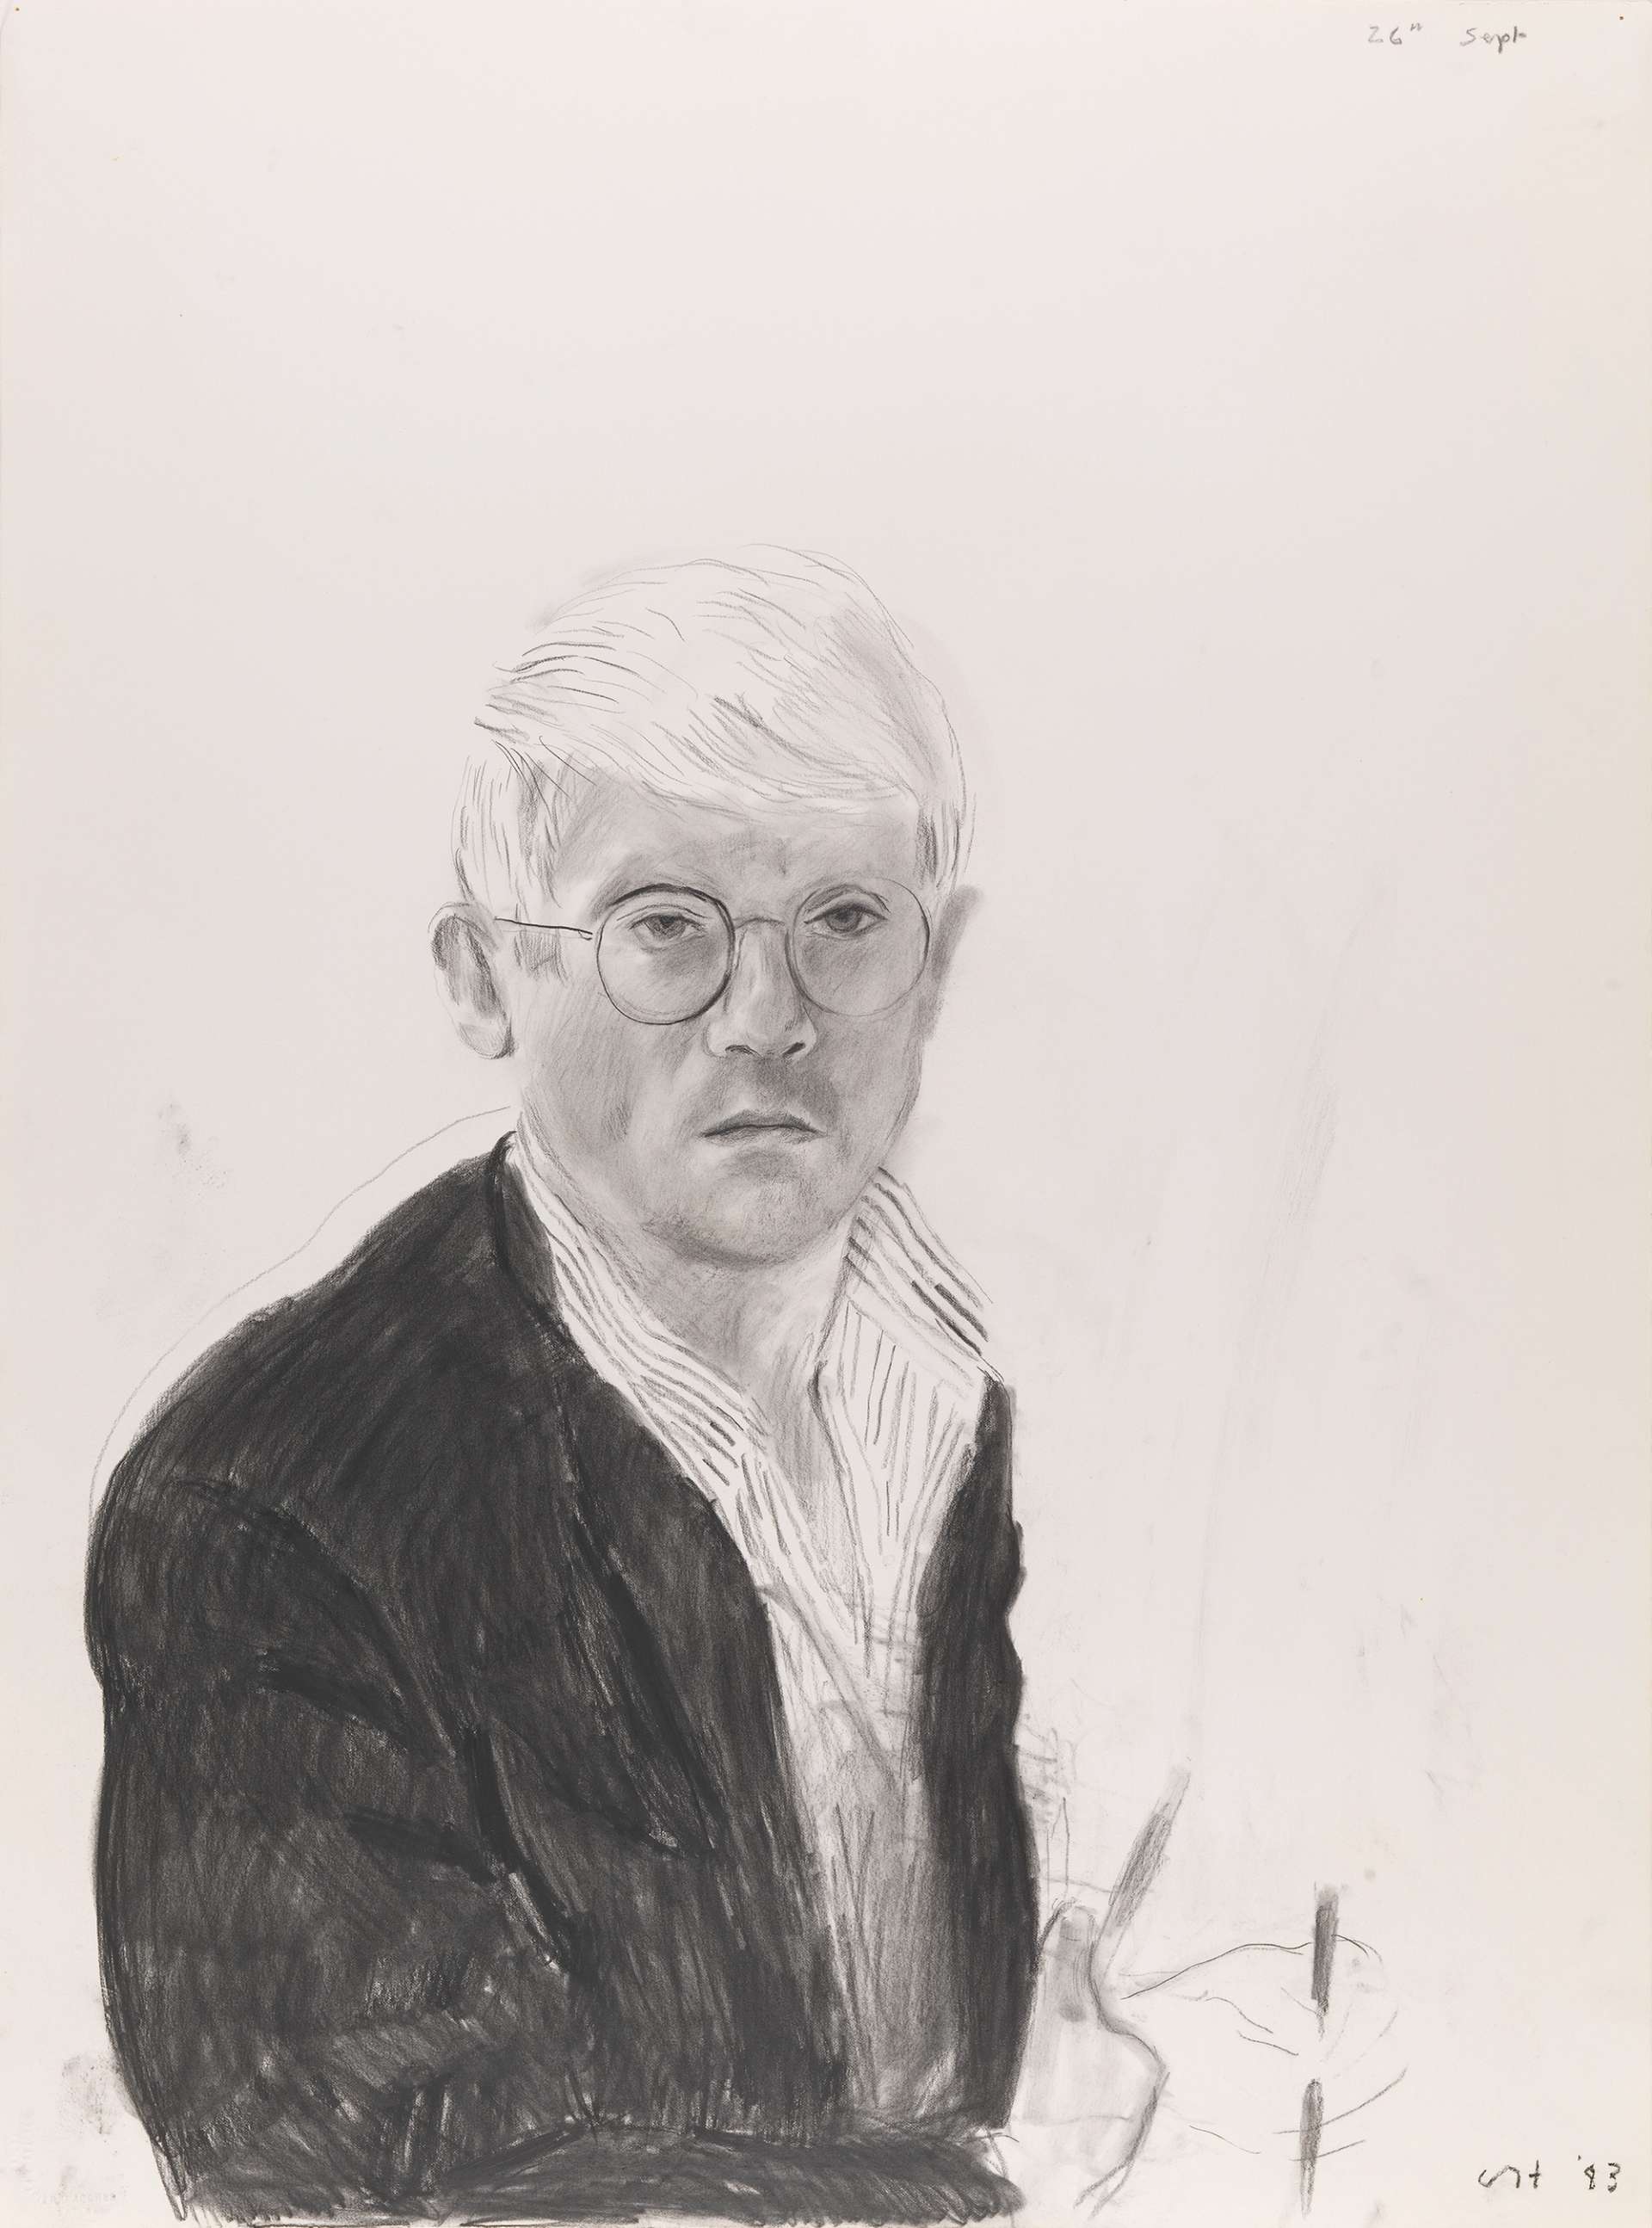 A monochromatic, charcoal self-portrait by David Hockney. The artist depicts himself in the lower left of the composition, wearing a dark jacket to contrast his light hair, wearing glasses and looking past the viewer.